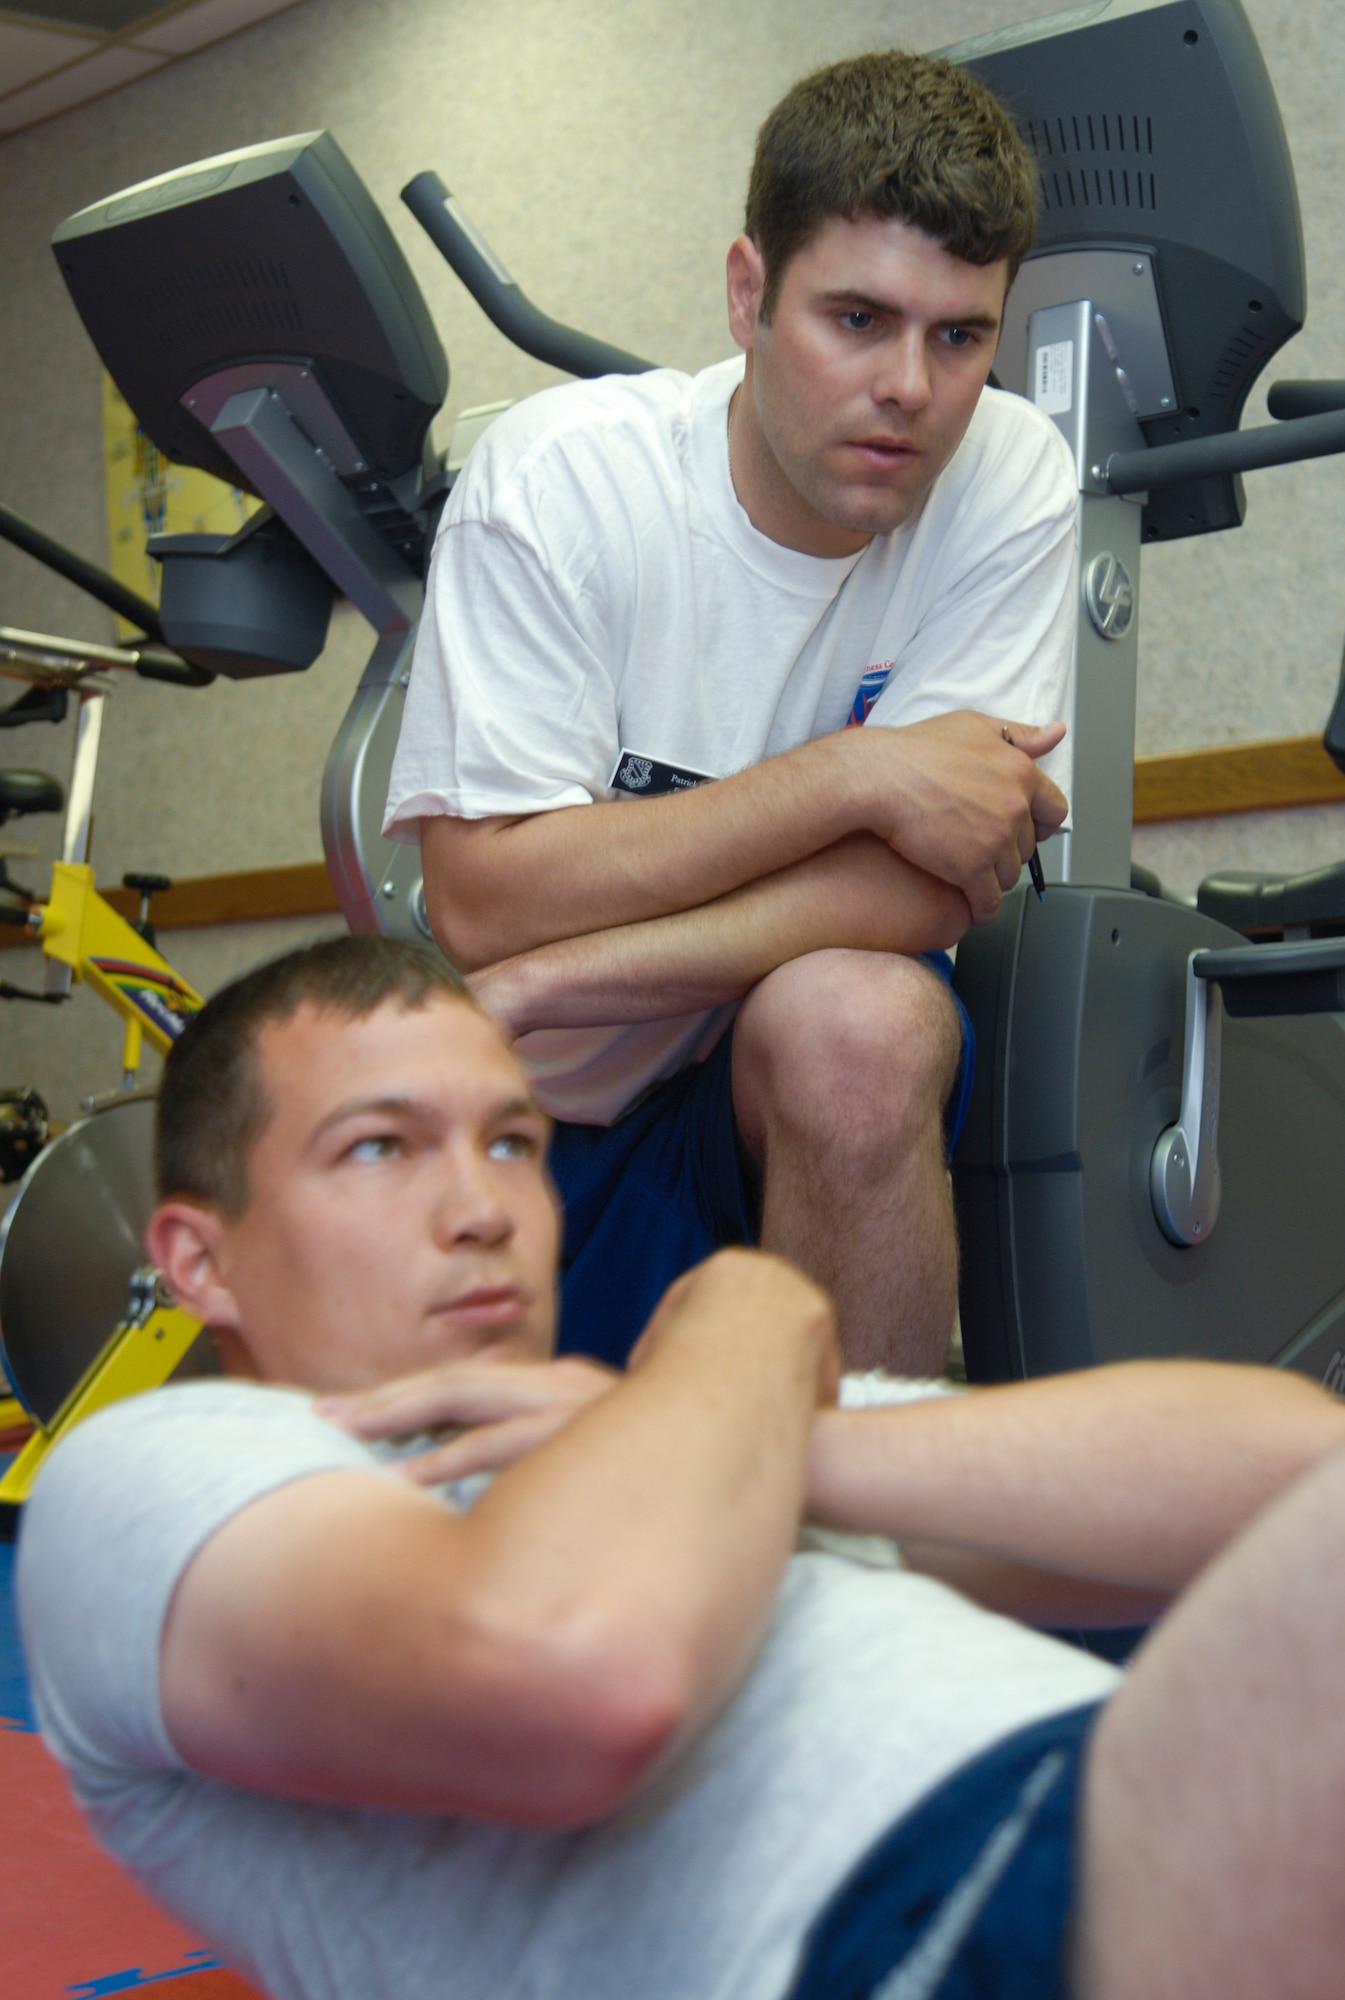 ELMENDORF AIR FORCE BASE, Alaska -- Patrick Lais observes the sit ups of Staff Sgt. Christopher Larsen during a testing session July 17. The Health and Wellness Center have begun employing civilian and contracted members to take over the centralized PT testing. Lais is a fitness test cell specialist with the HAWC. Larsen is a member of the 3rd Maintenance Group. (U.S. Air Force photo/Senior Airman David Carbajal)